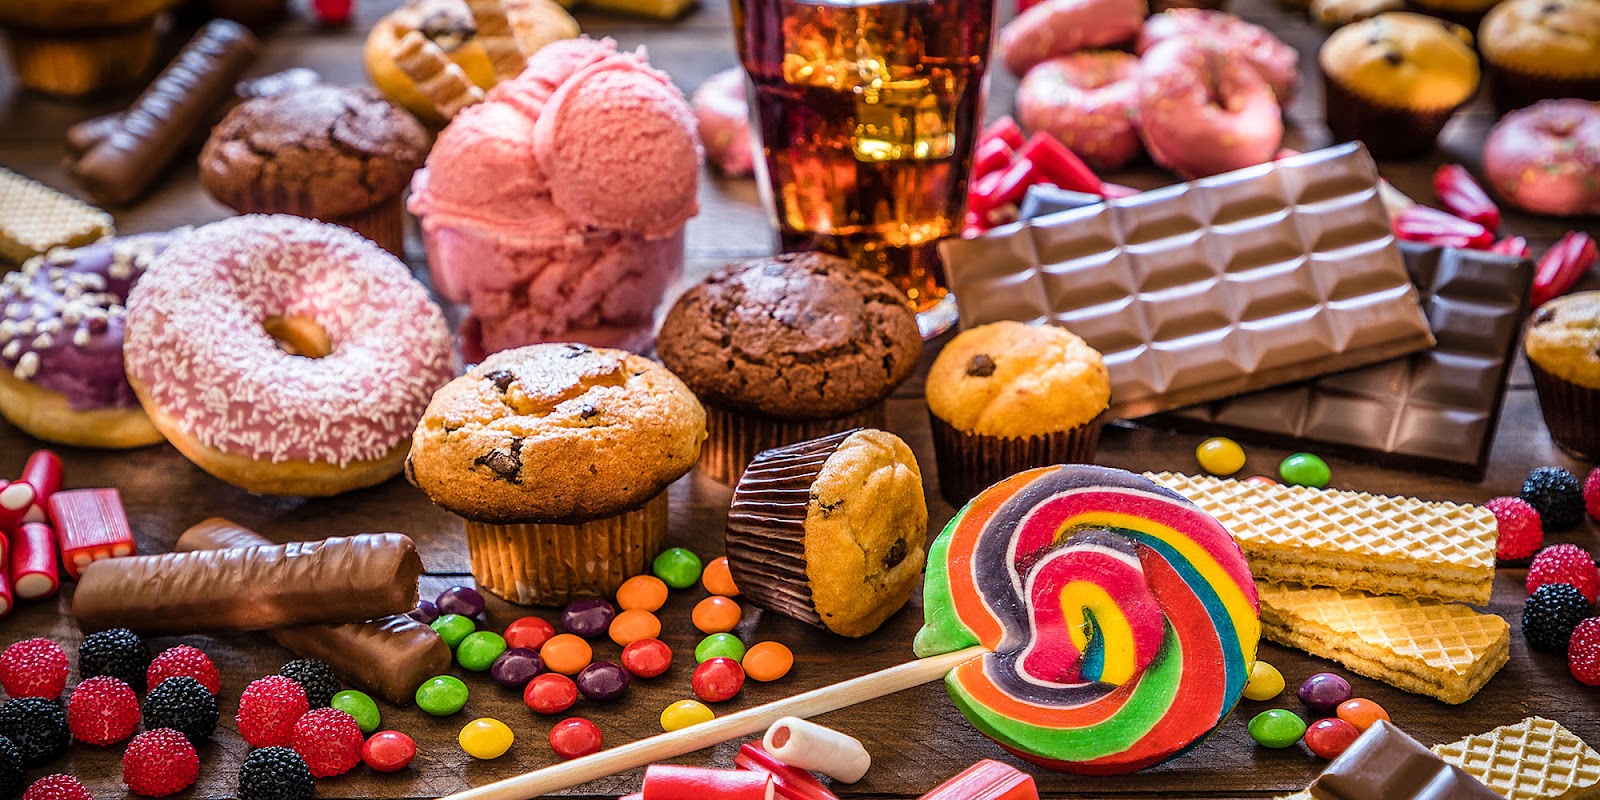 An array of different sugary sweets and treats